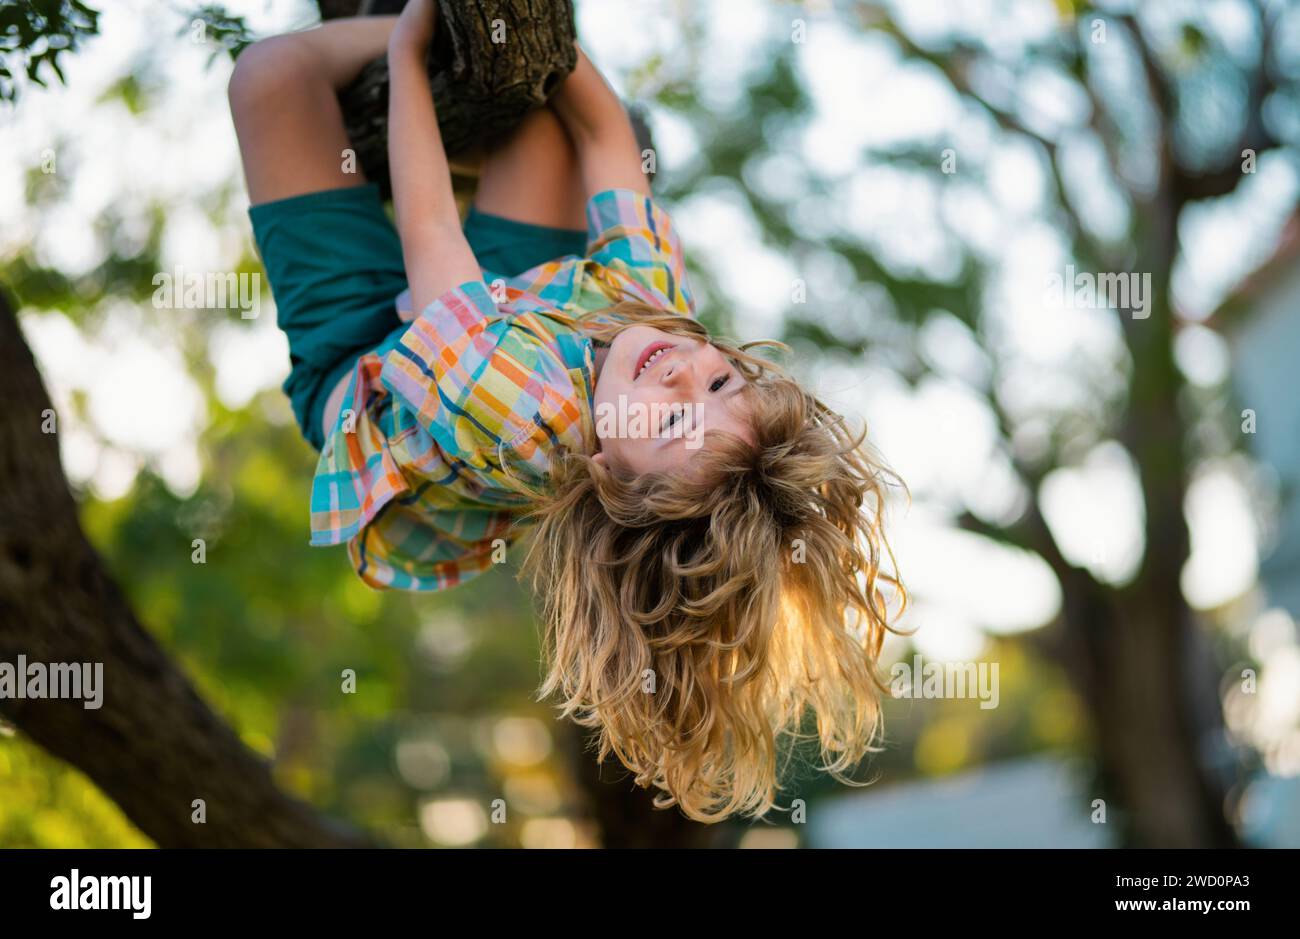 Cute child learning to climb, having fun in summer park. Kids climbing trees, hanging upside down on a tree in a park. Upside down. Childhood concept. Stock Photo